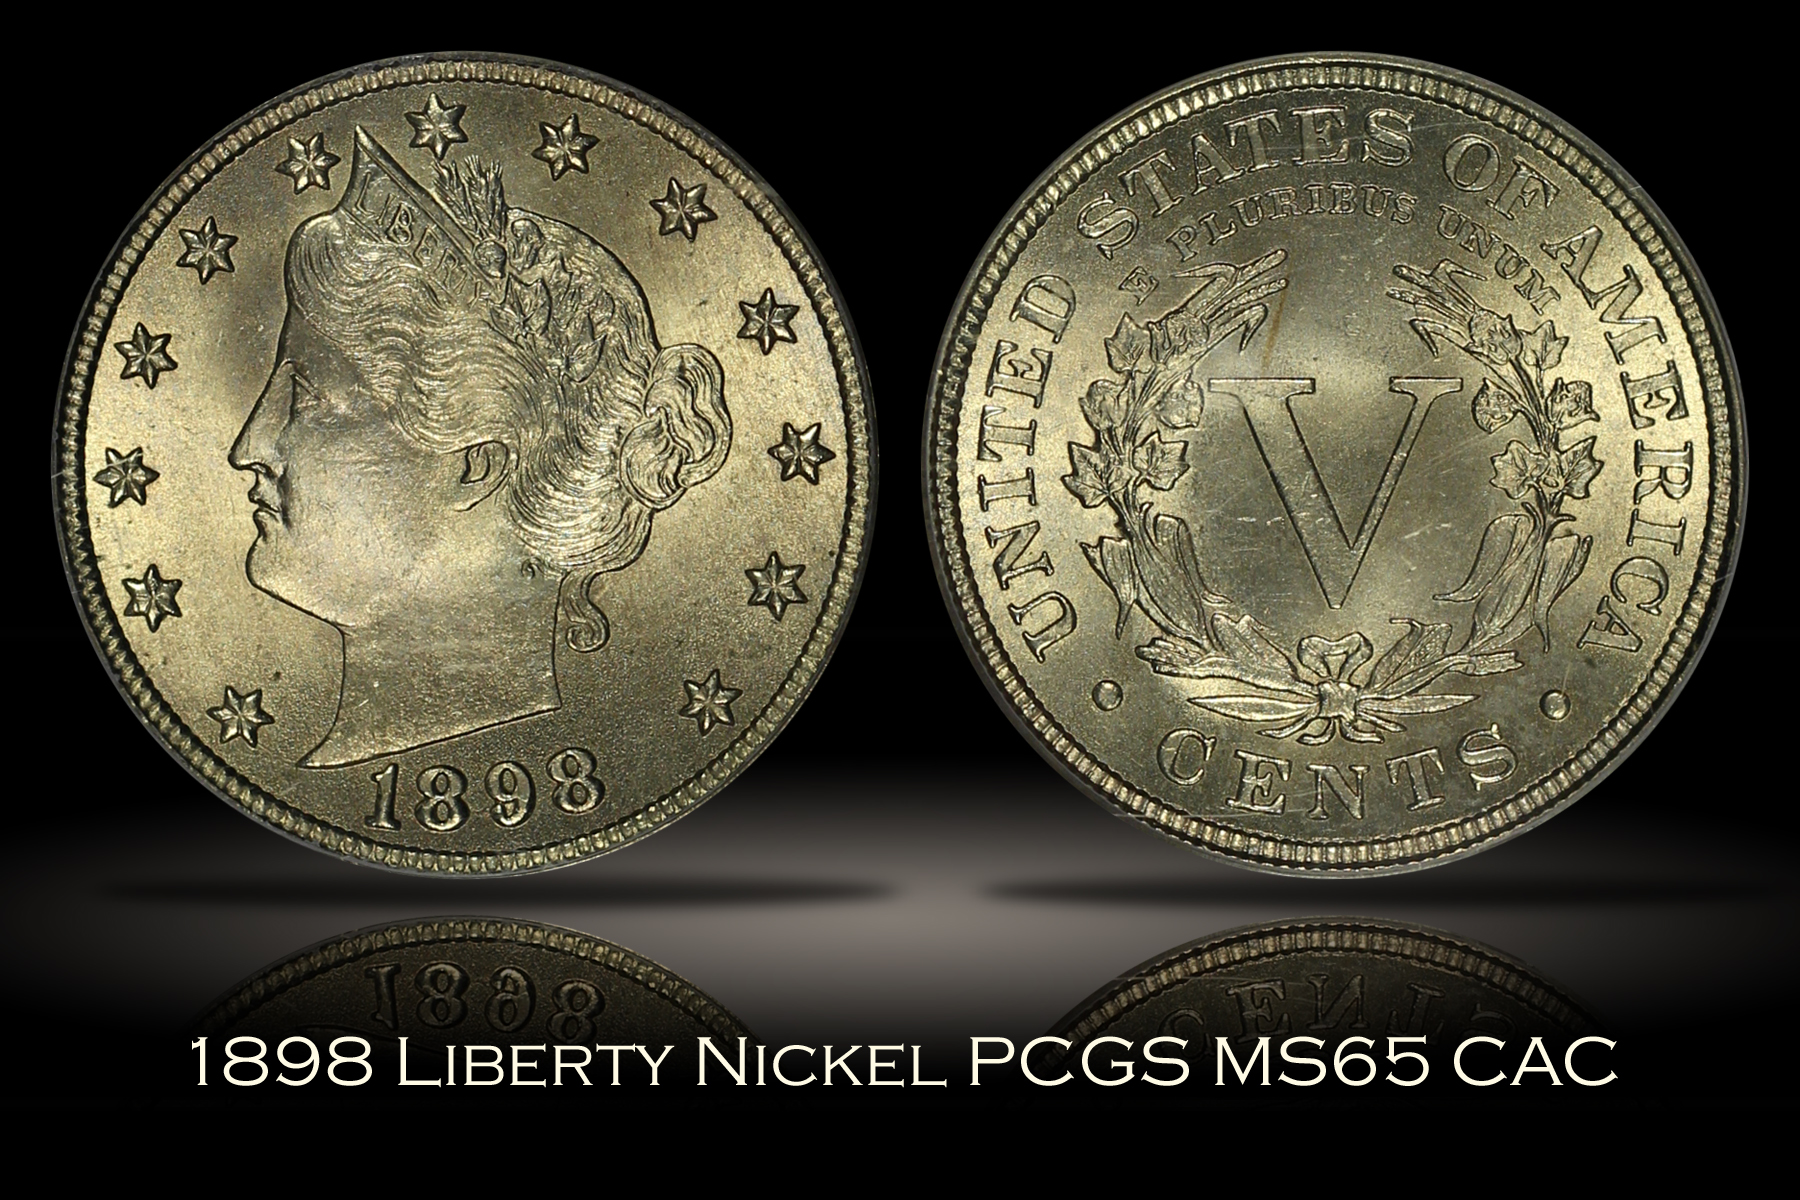 Michael Kittle Rare Coins - 1898 Liberty Nickel PCGS MS65